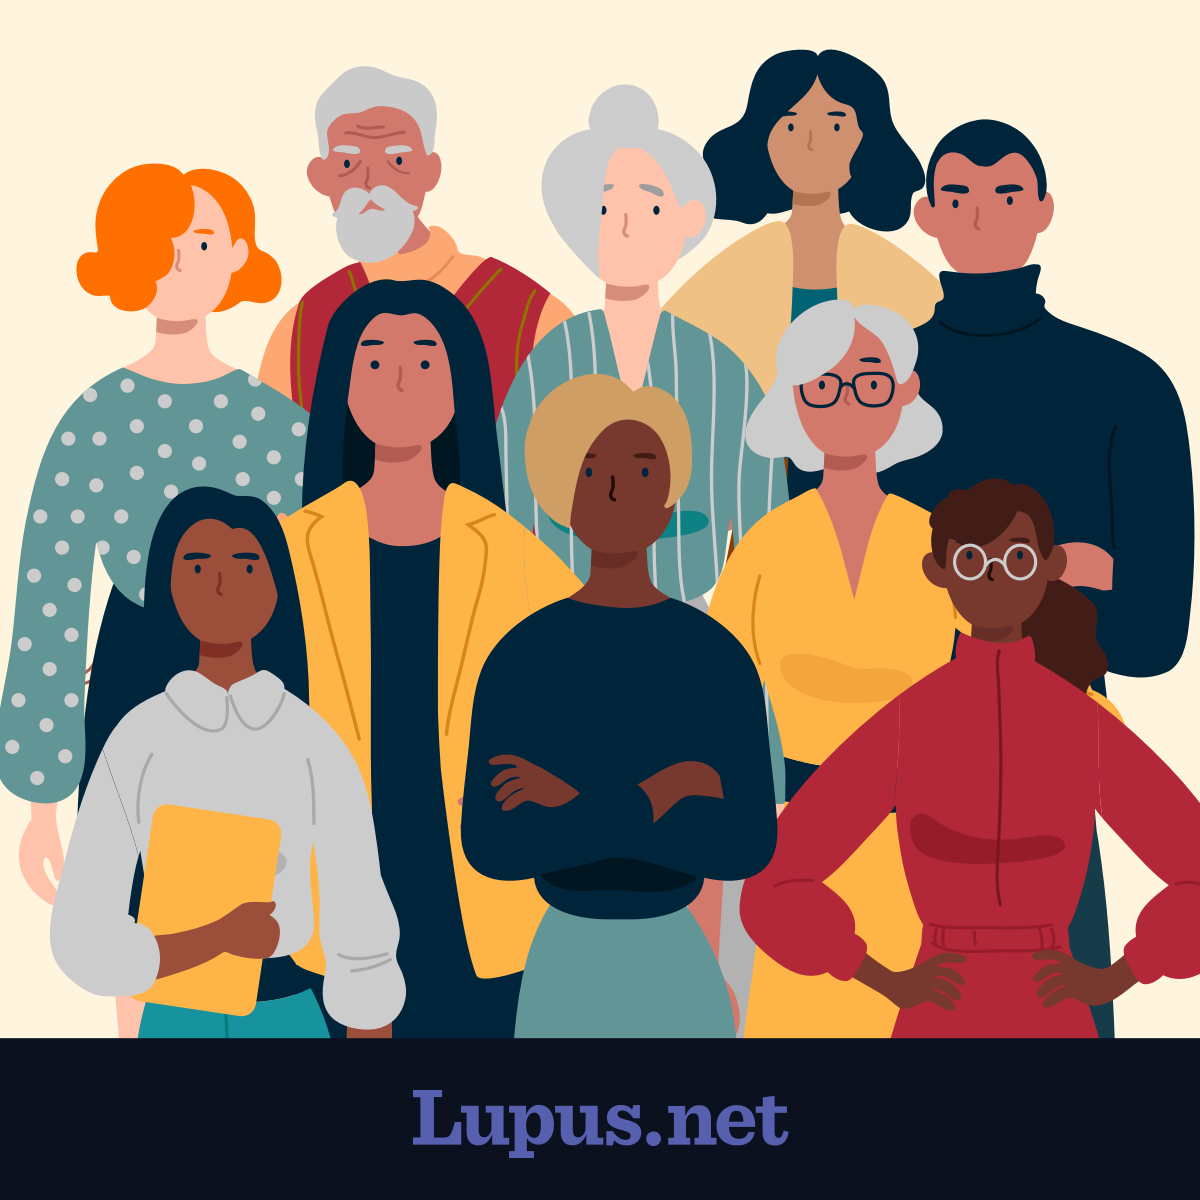 Illustration of men and women of various ages and races, to show the range of people affected by lupus.